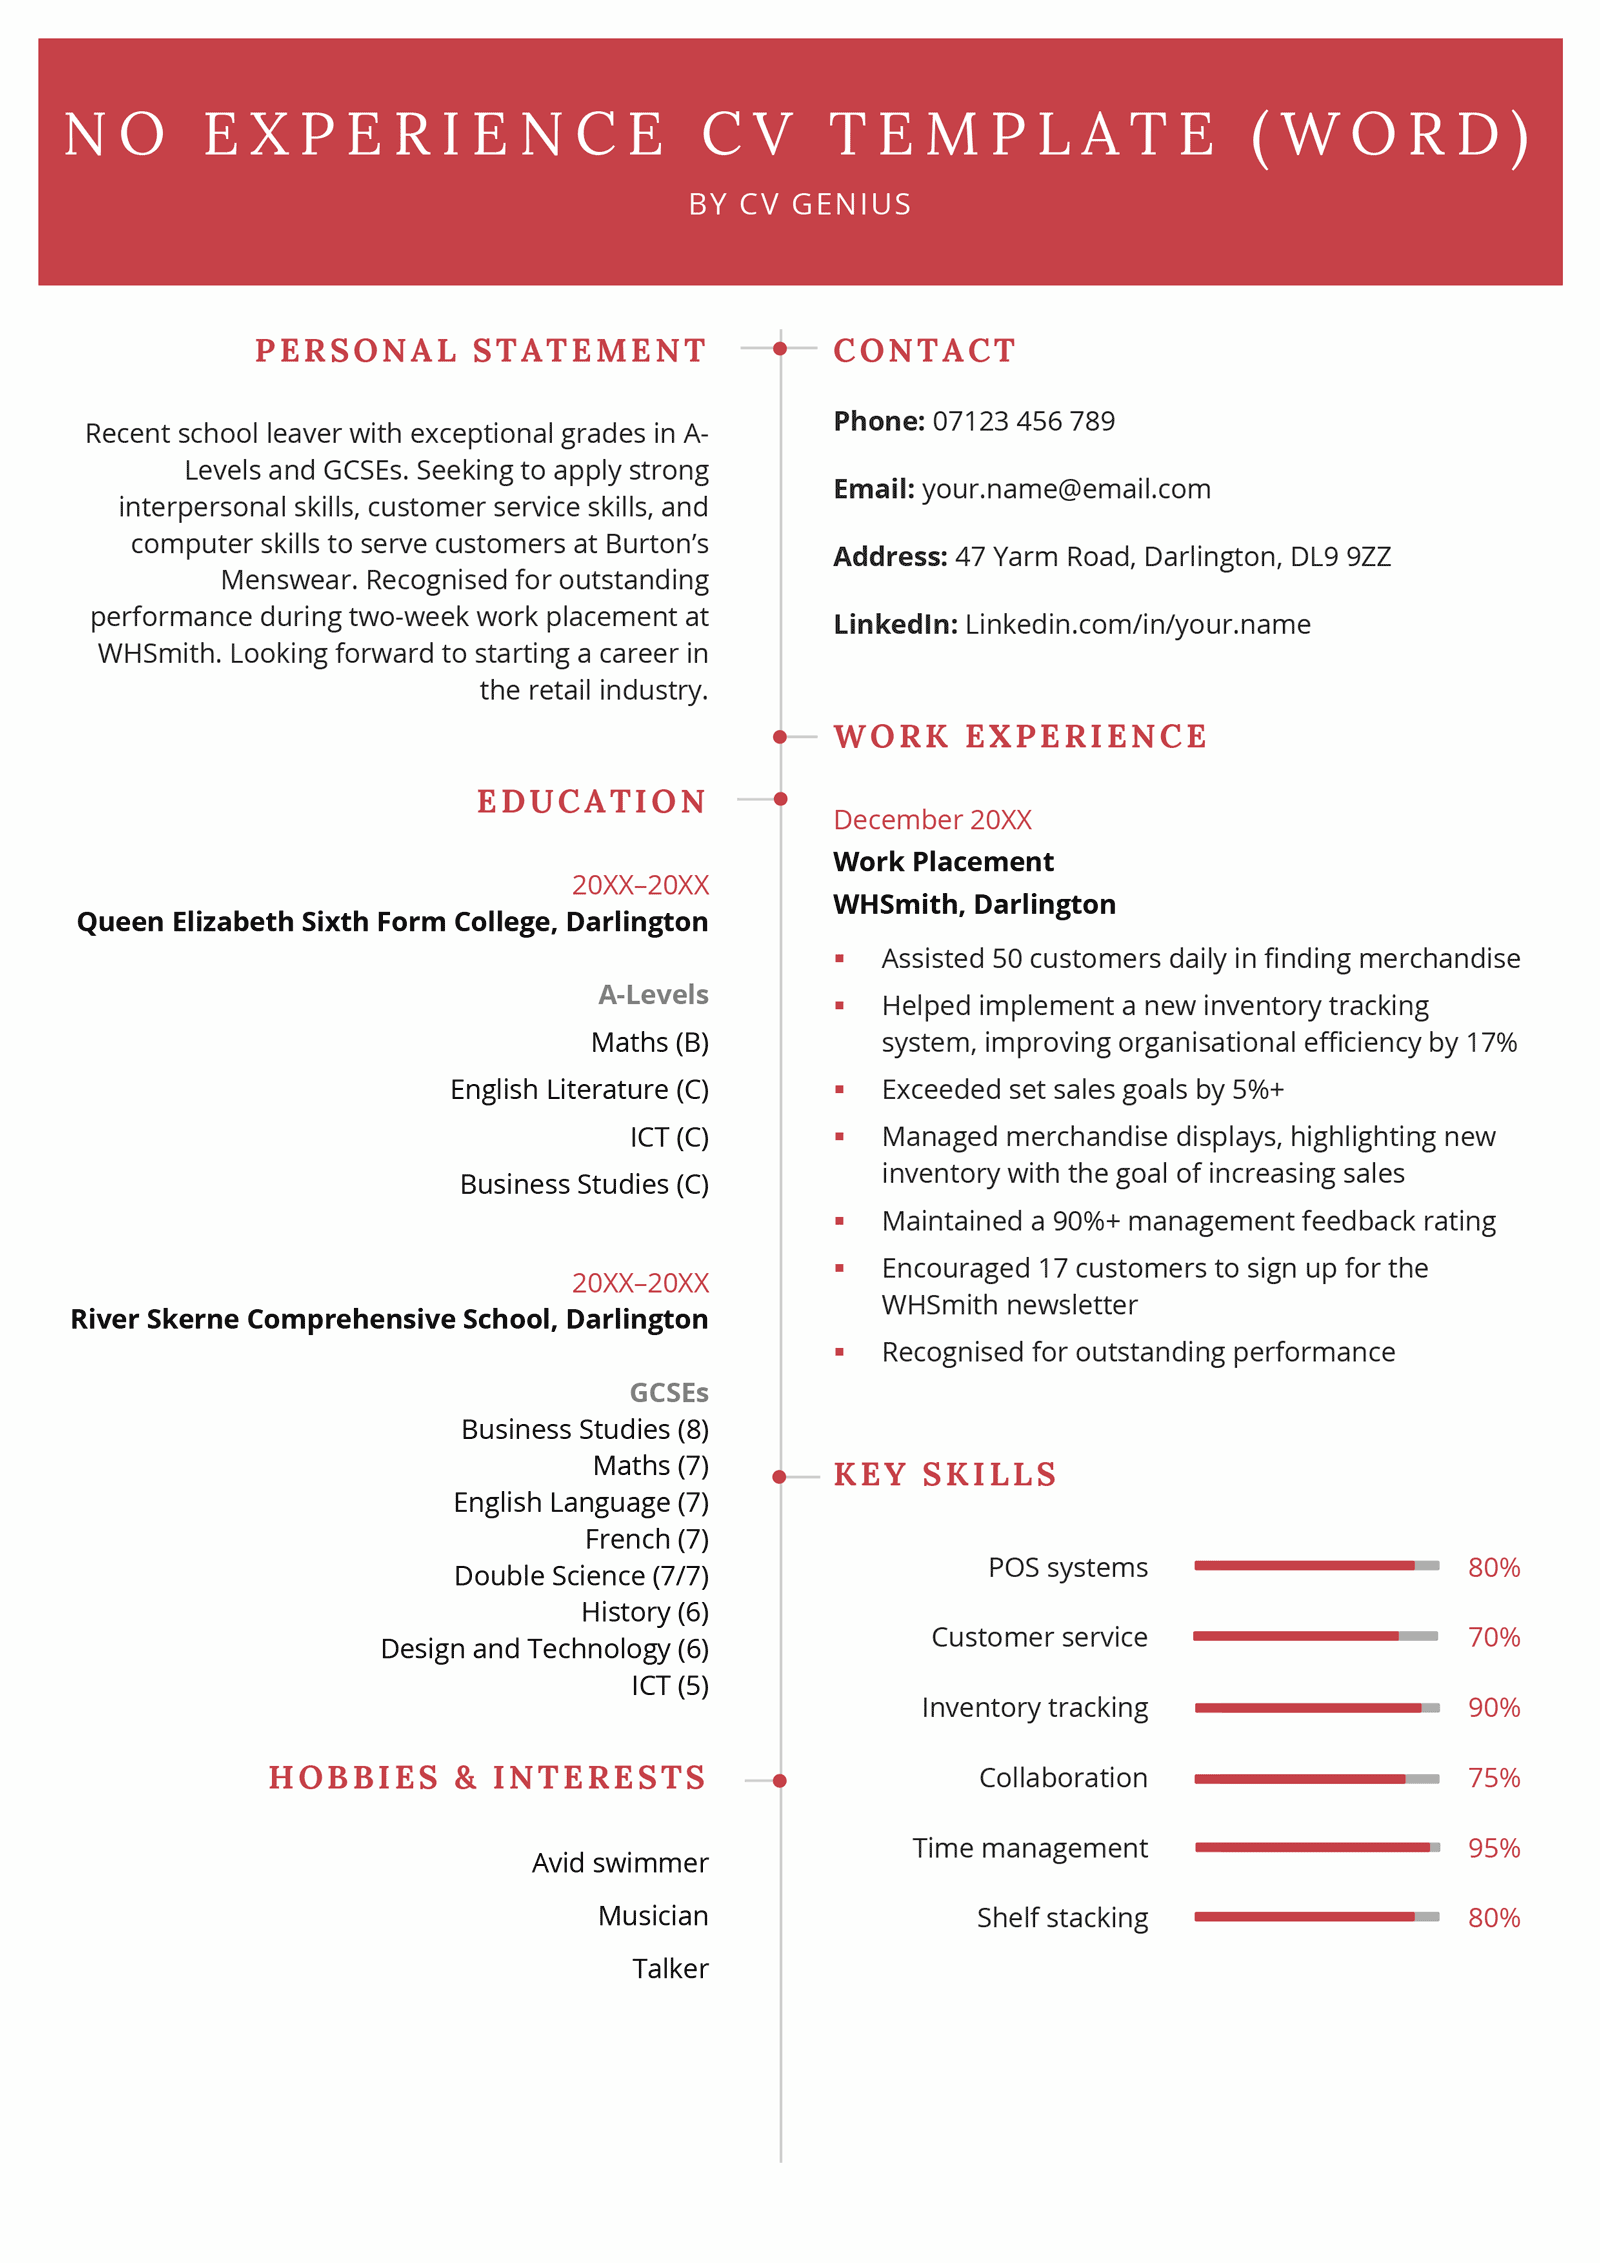 Word CV template for job seekers with no experience, featuring a bold header and modern two-column layout.